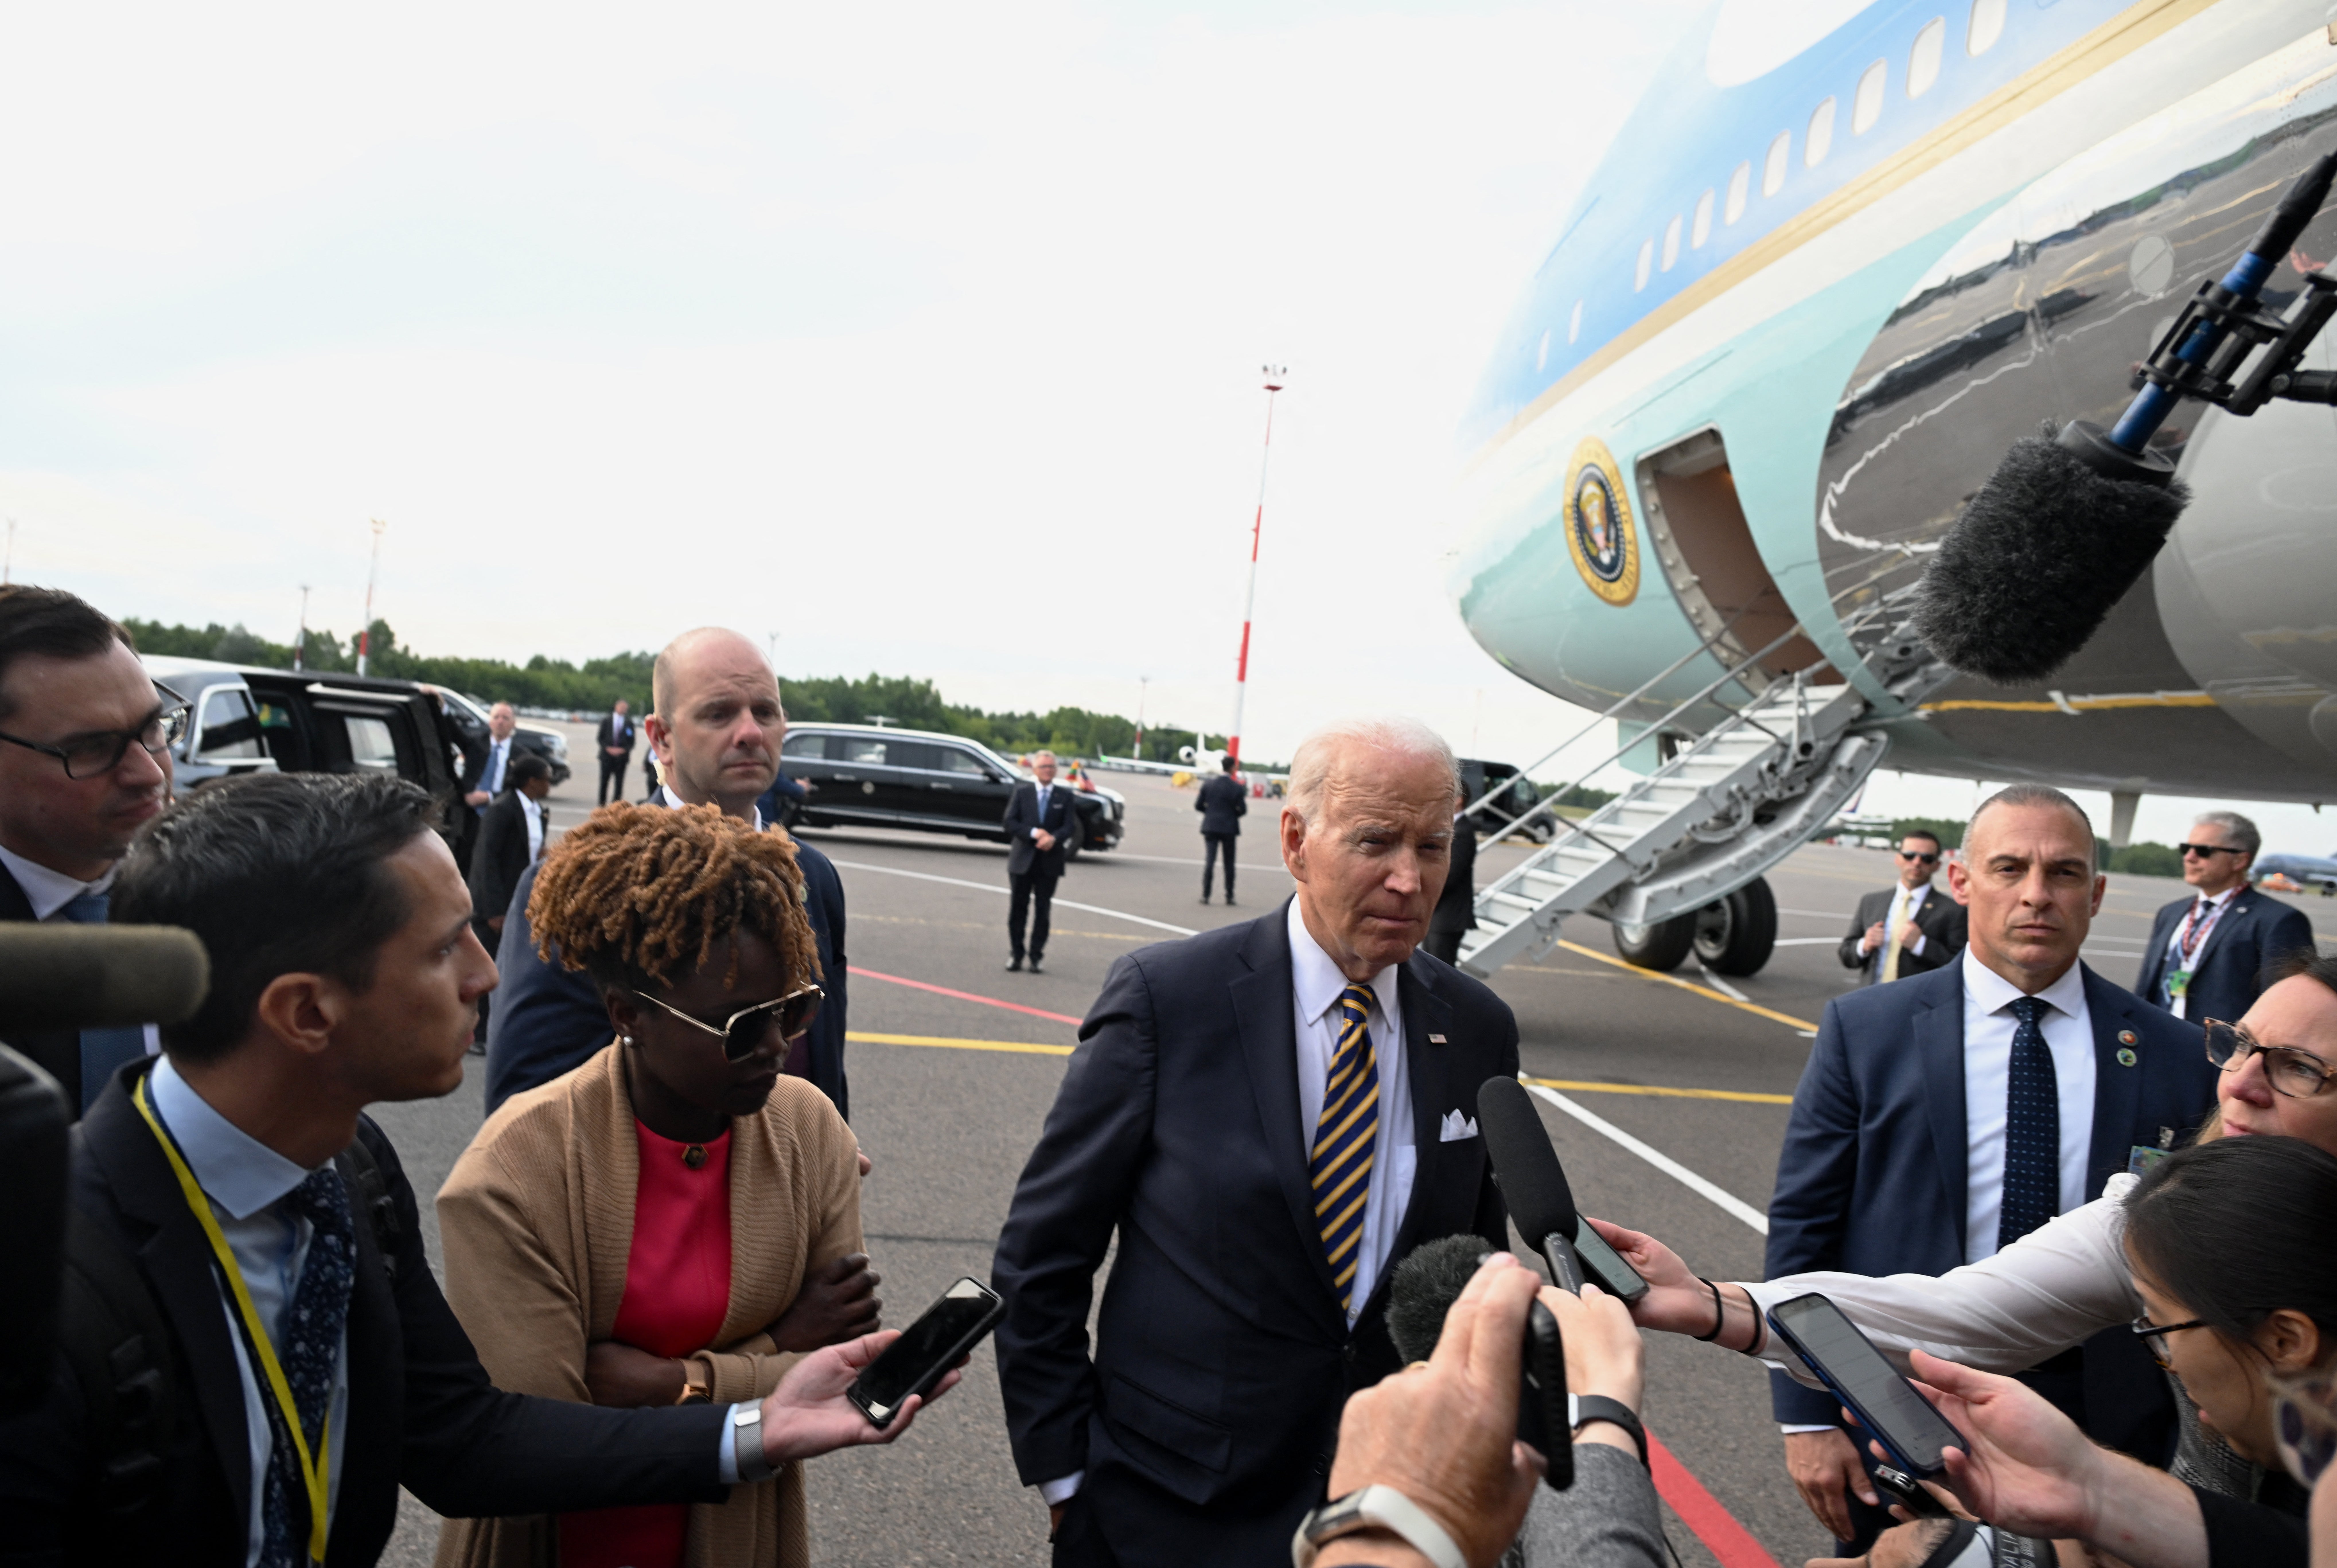 President Joe Biden answers questions from the press prior to boarding the Air force One at the Vilnius International Airport on 12 July 2023